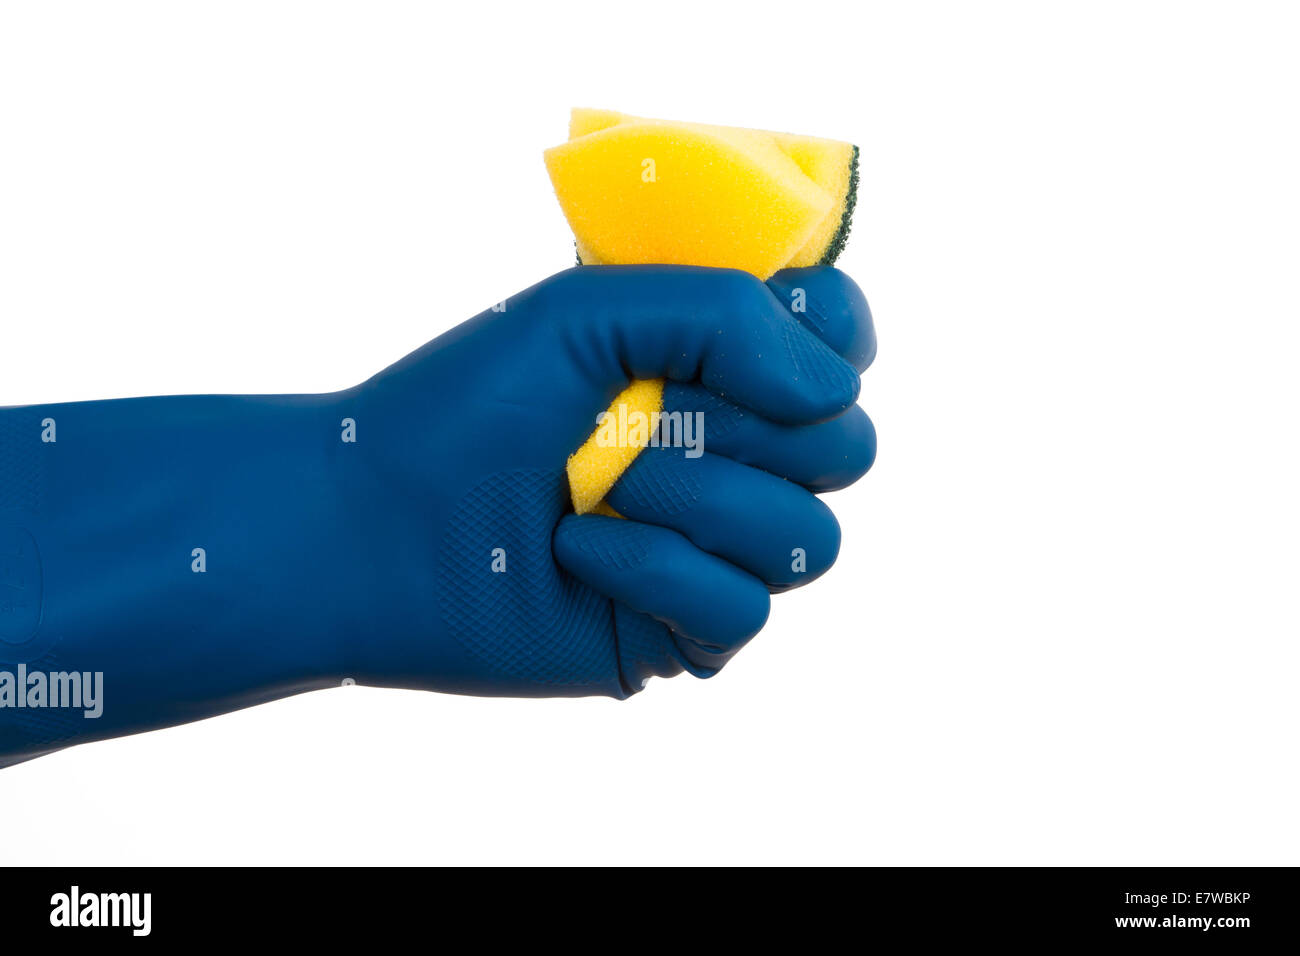 https://c8.alamy.com/comp/E7WBKP/hand-squeezes-cleaning-sponge-isolated-on-white-background-E7WBKP.jpg